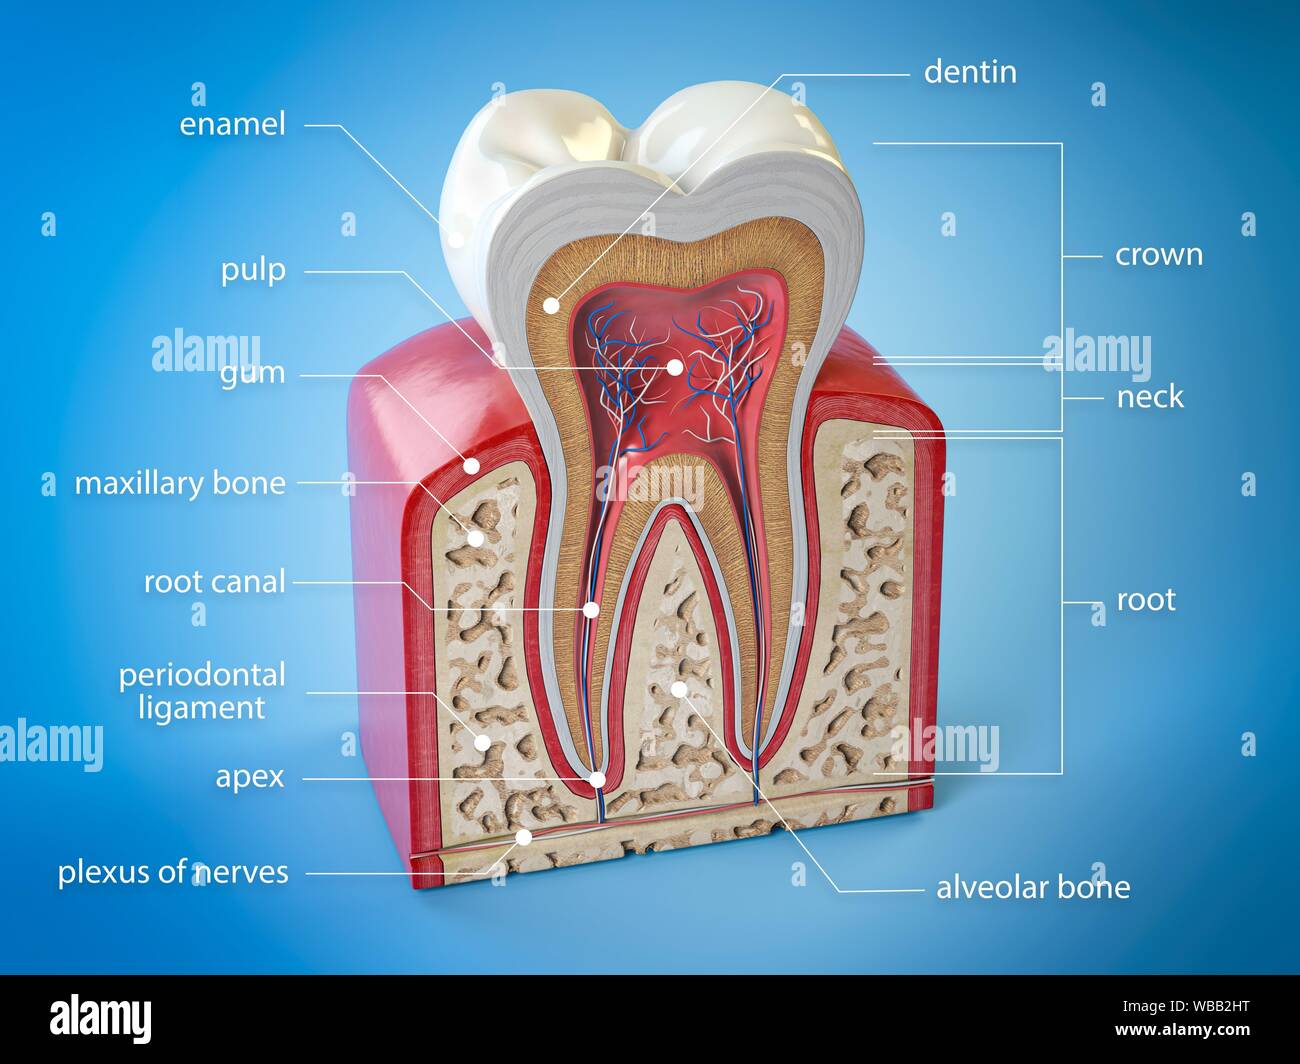 Anatomy Of A Molar Tooth Anatomical Charts And Posters